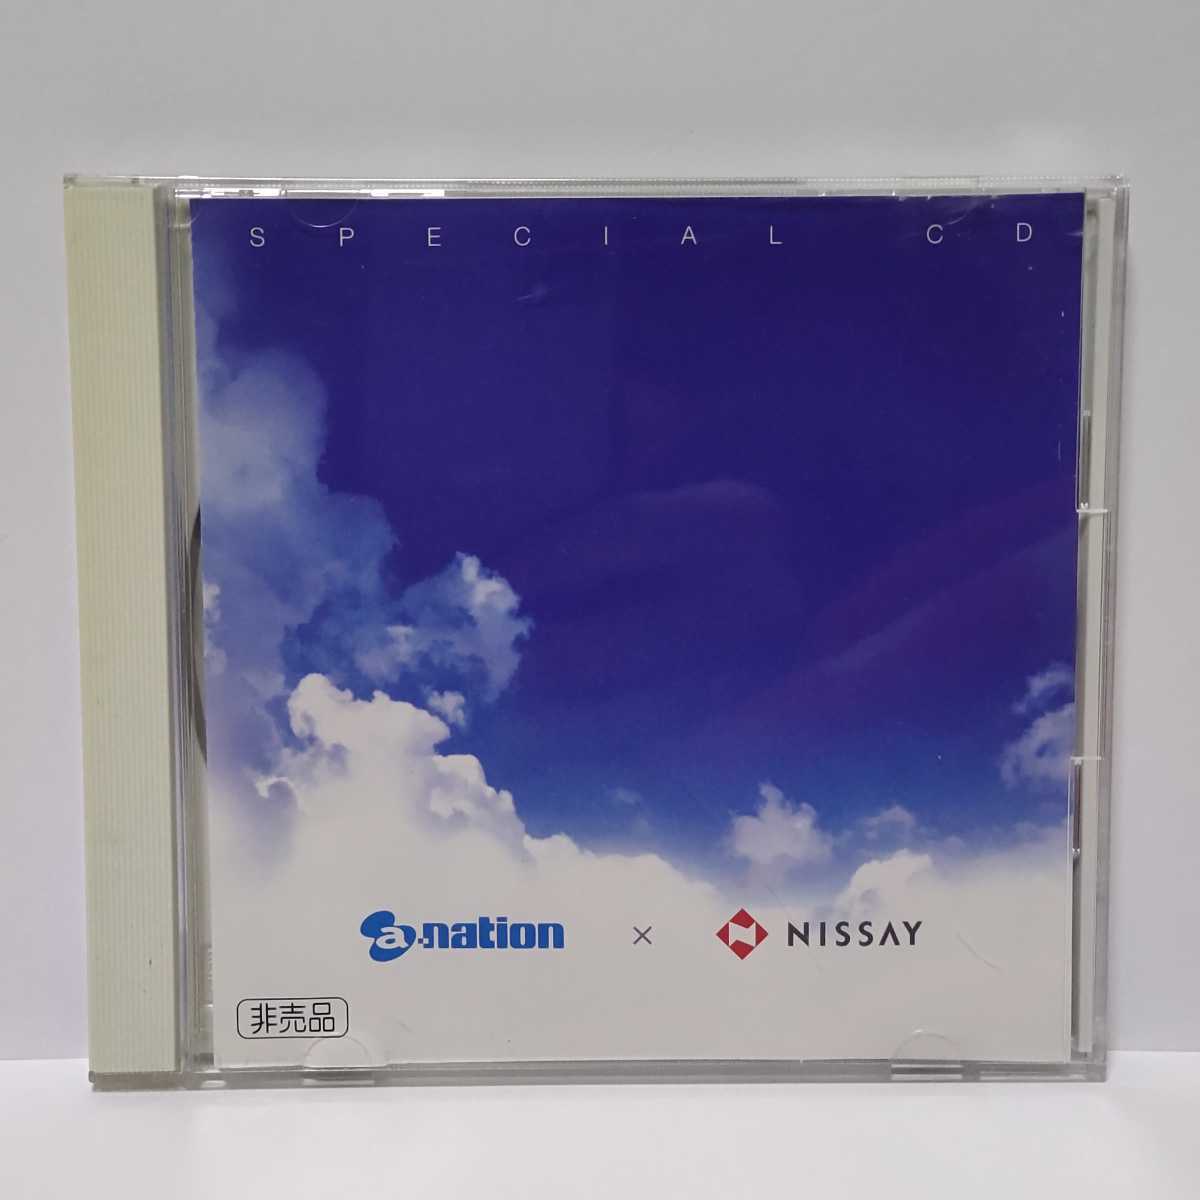 a-nation NISSAY SPECIAL CD 非売品 オムニバス 浜崎あゆみ/倖田來未/大塚愛/東方神起/AAA ★視聴確認済み★_画像1